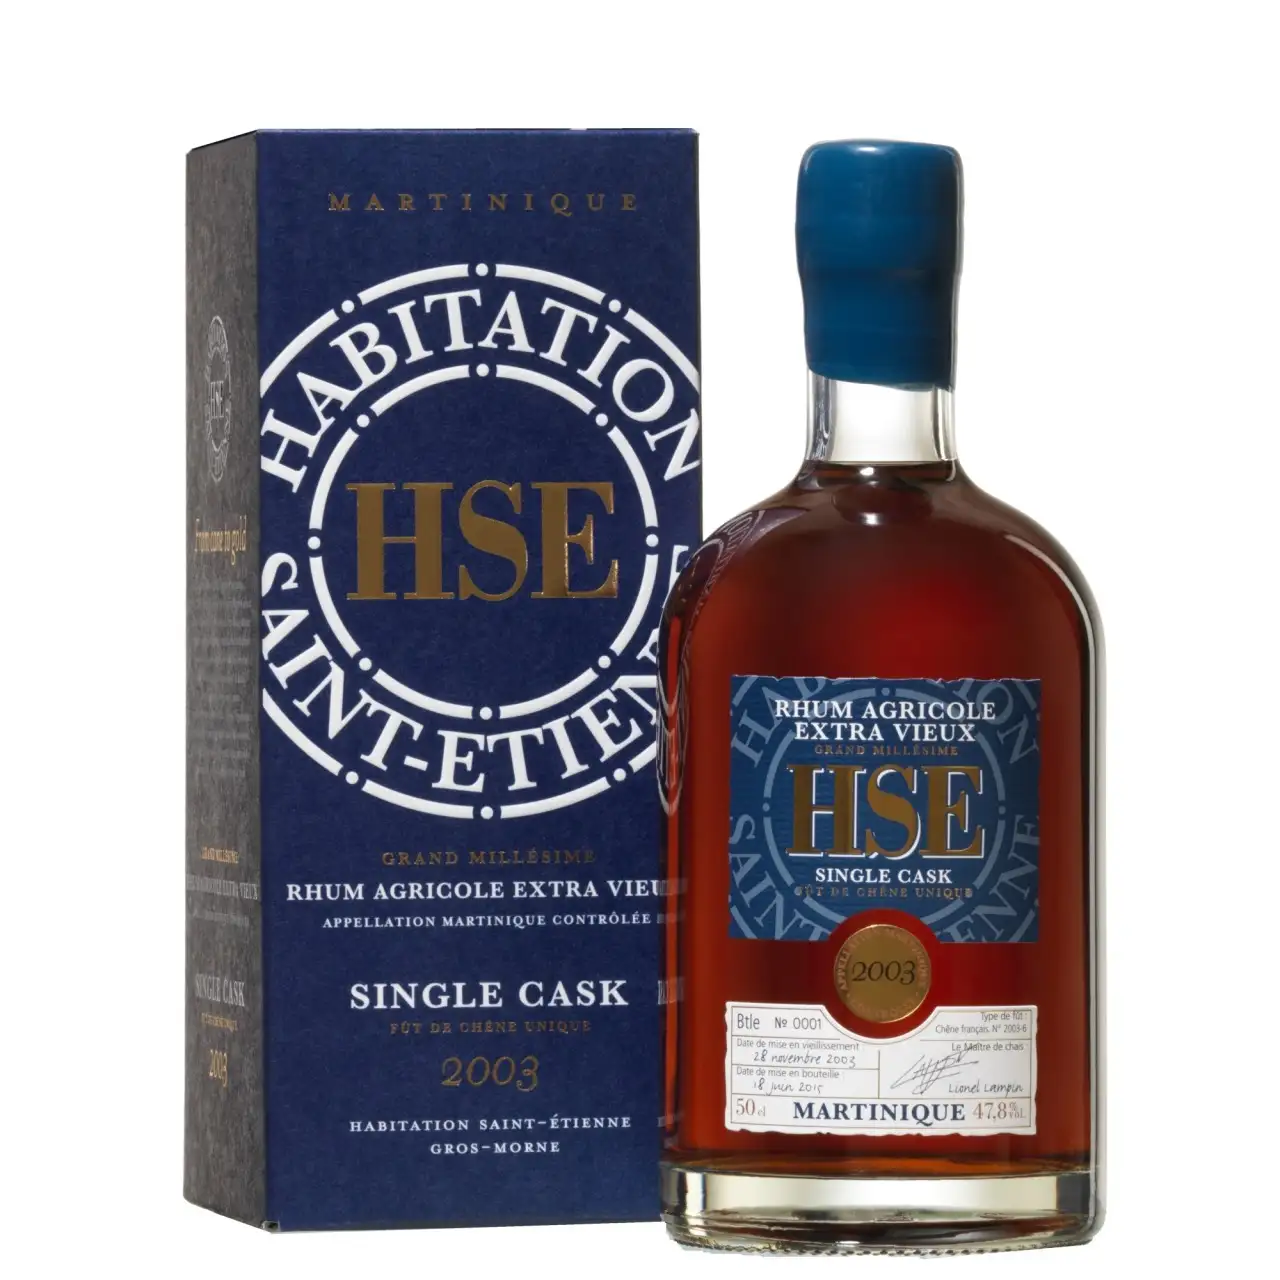 Image of the front of the bottle of the rum HSE Single Cask (MEB 2017)